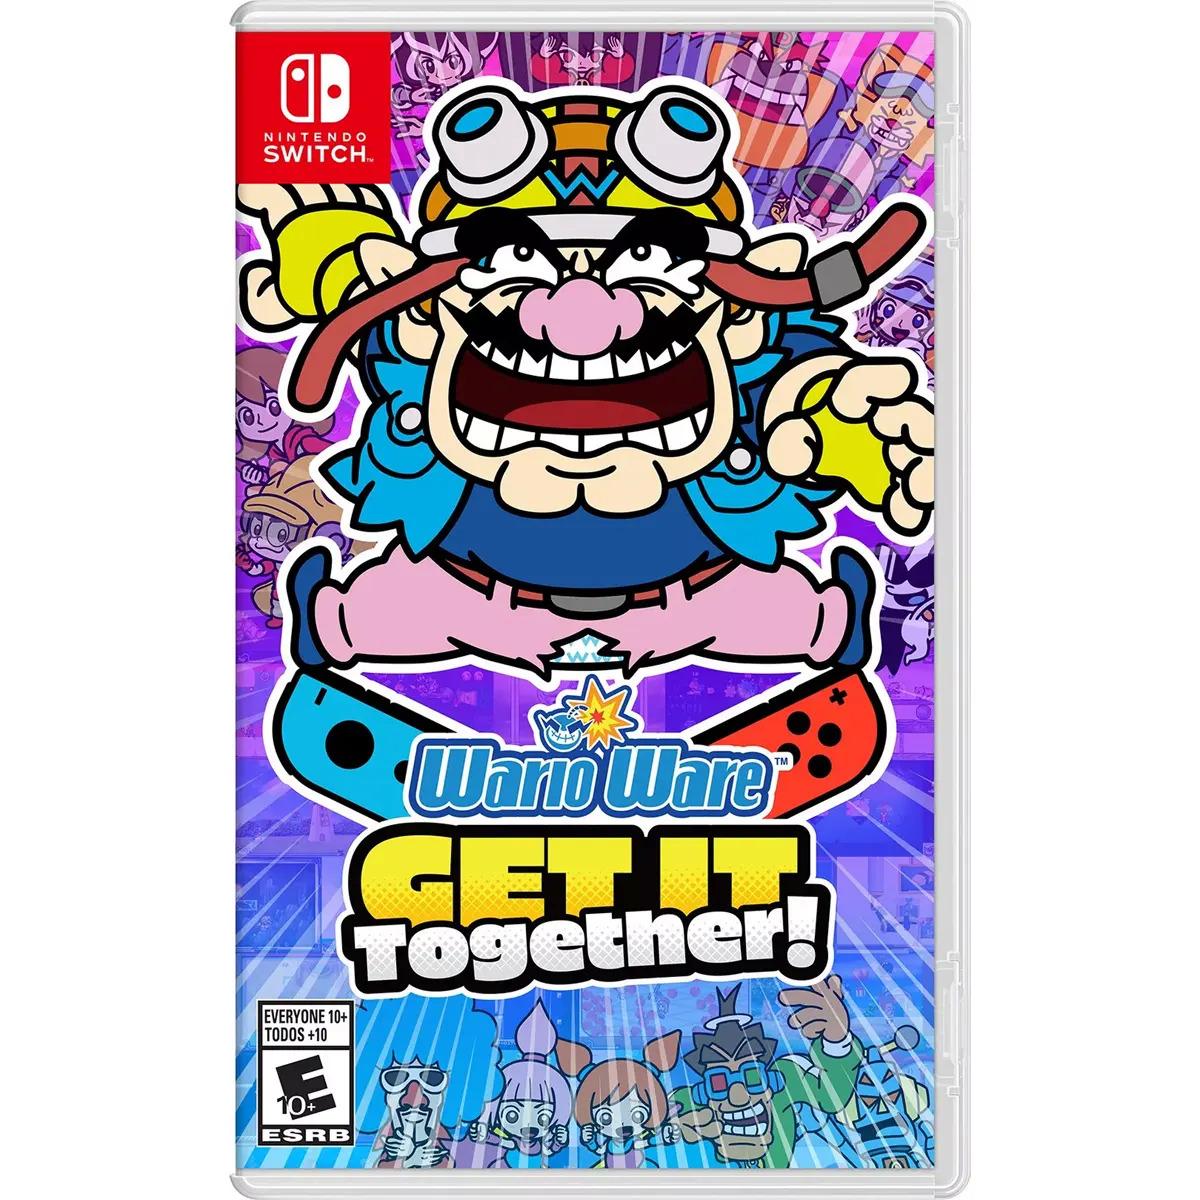 WarioWare Get It Together Nintendo Switch for $19.99